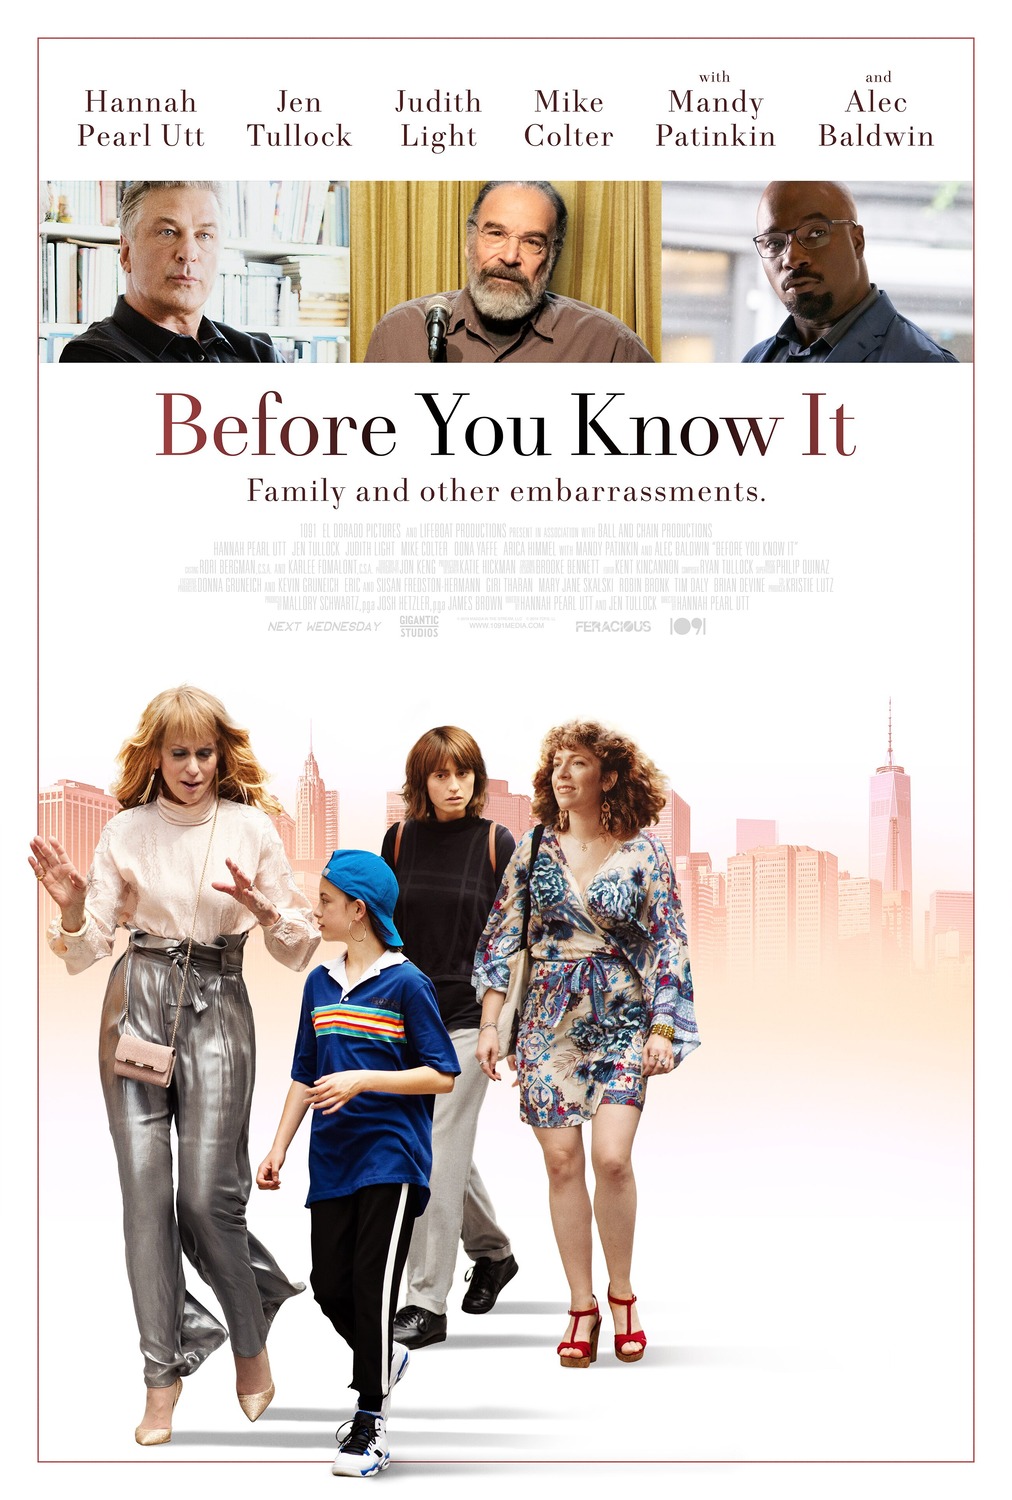 Before You Know It (2019) Hannah Pearl Utt